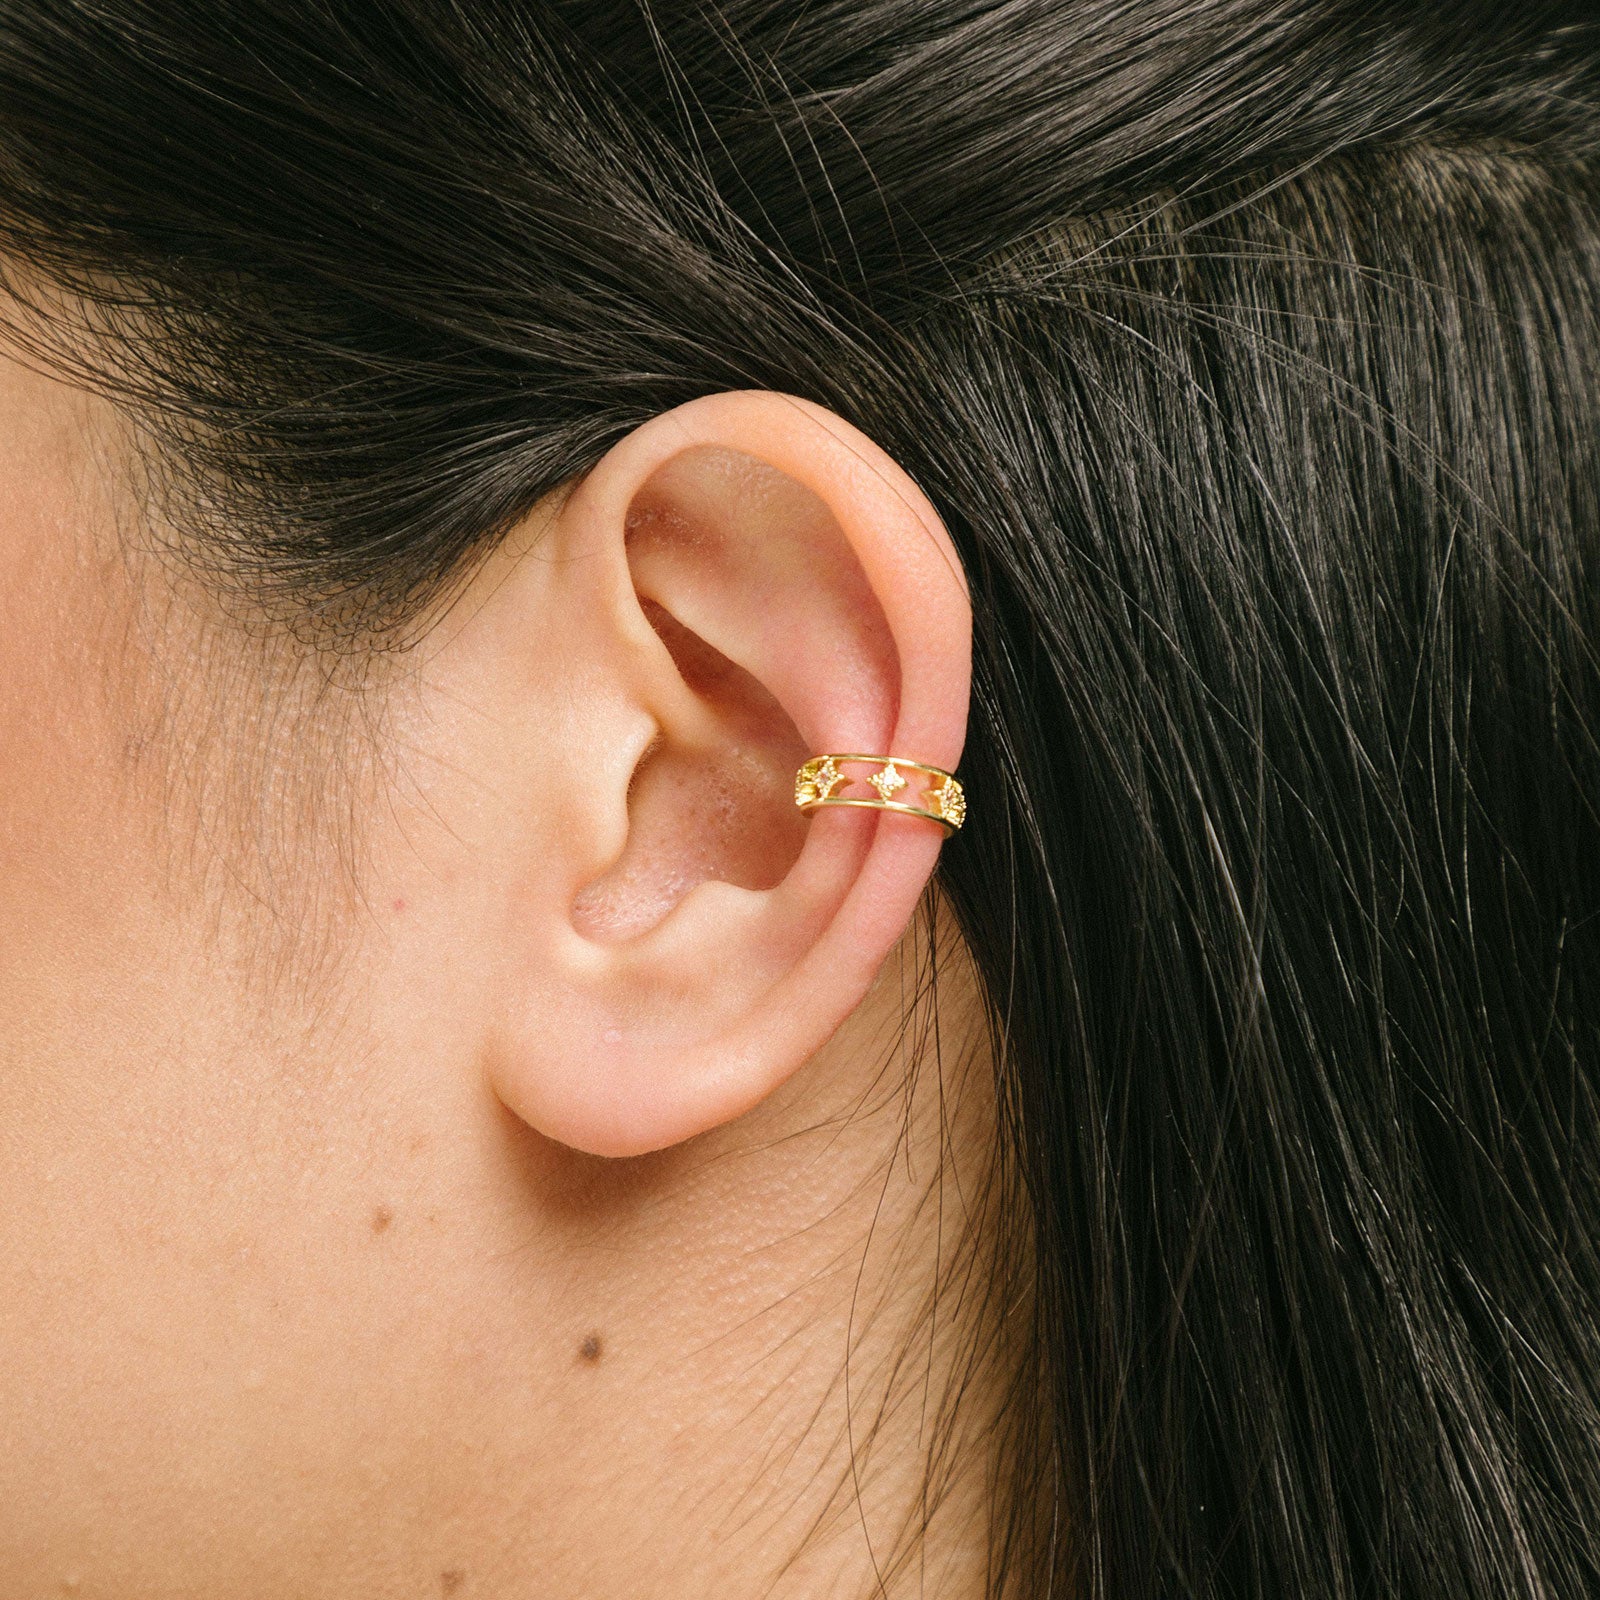 A model wearing our Star Ear Cuff, a sleek and modern accessory crafted from gold-tone plated zinc alloy, adorned with sparkling rhinestones and charming stars. This versatile piece is designed to elevate the style of both women and men, making it the perfect choice to showcase your fashionable side.